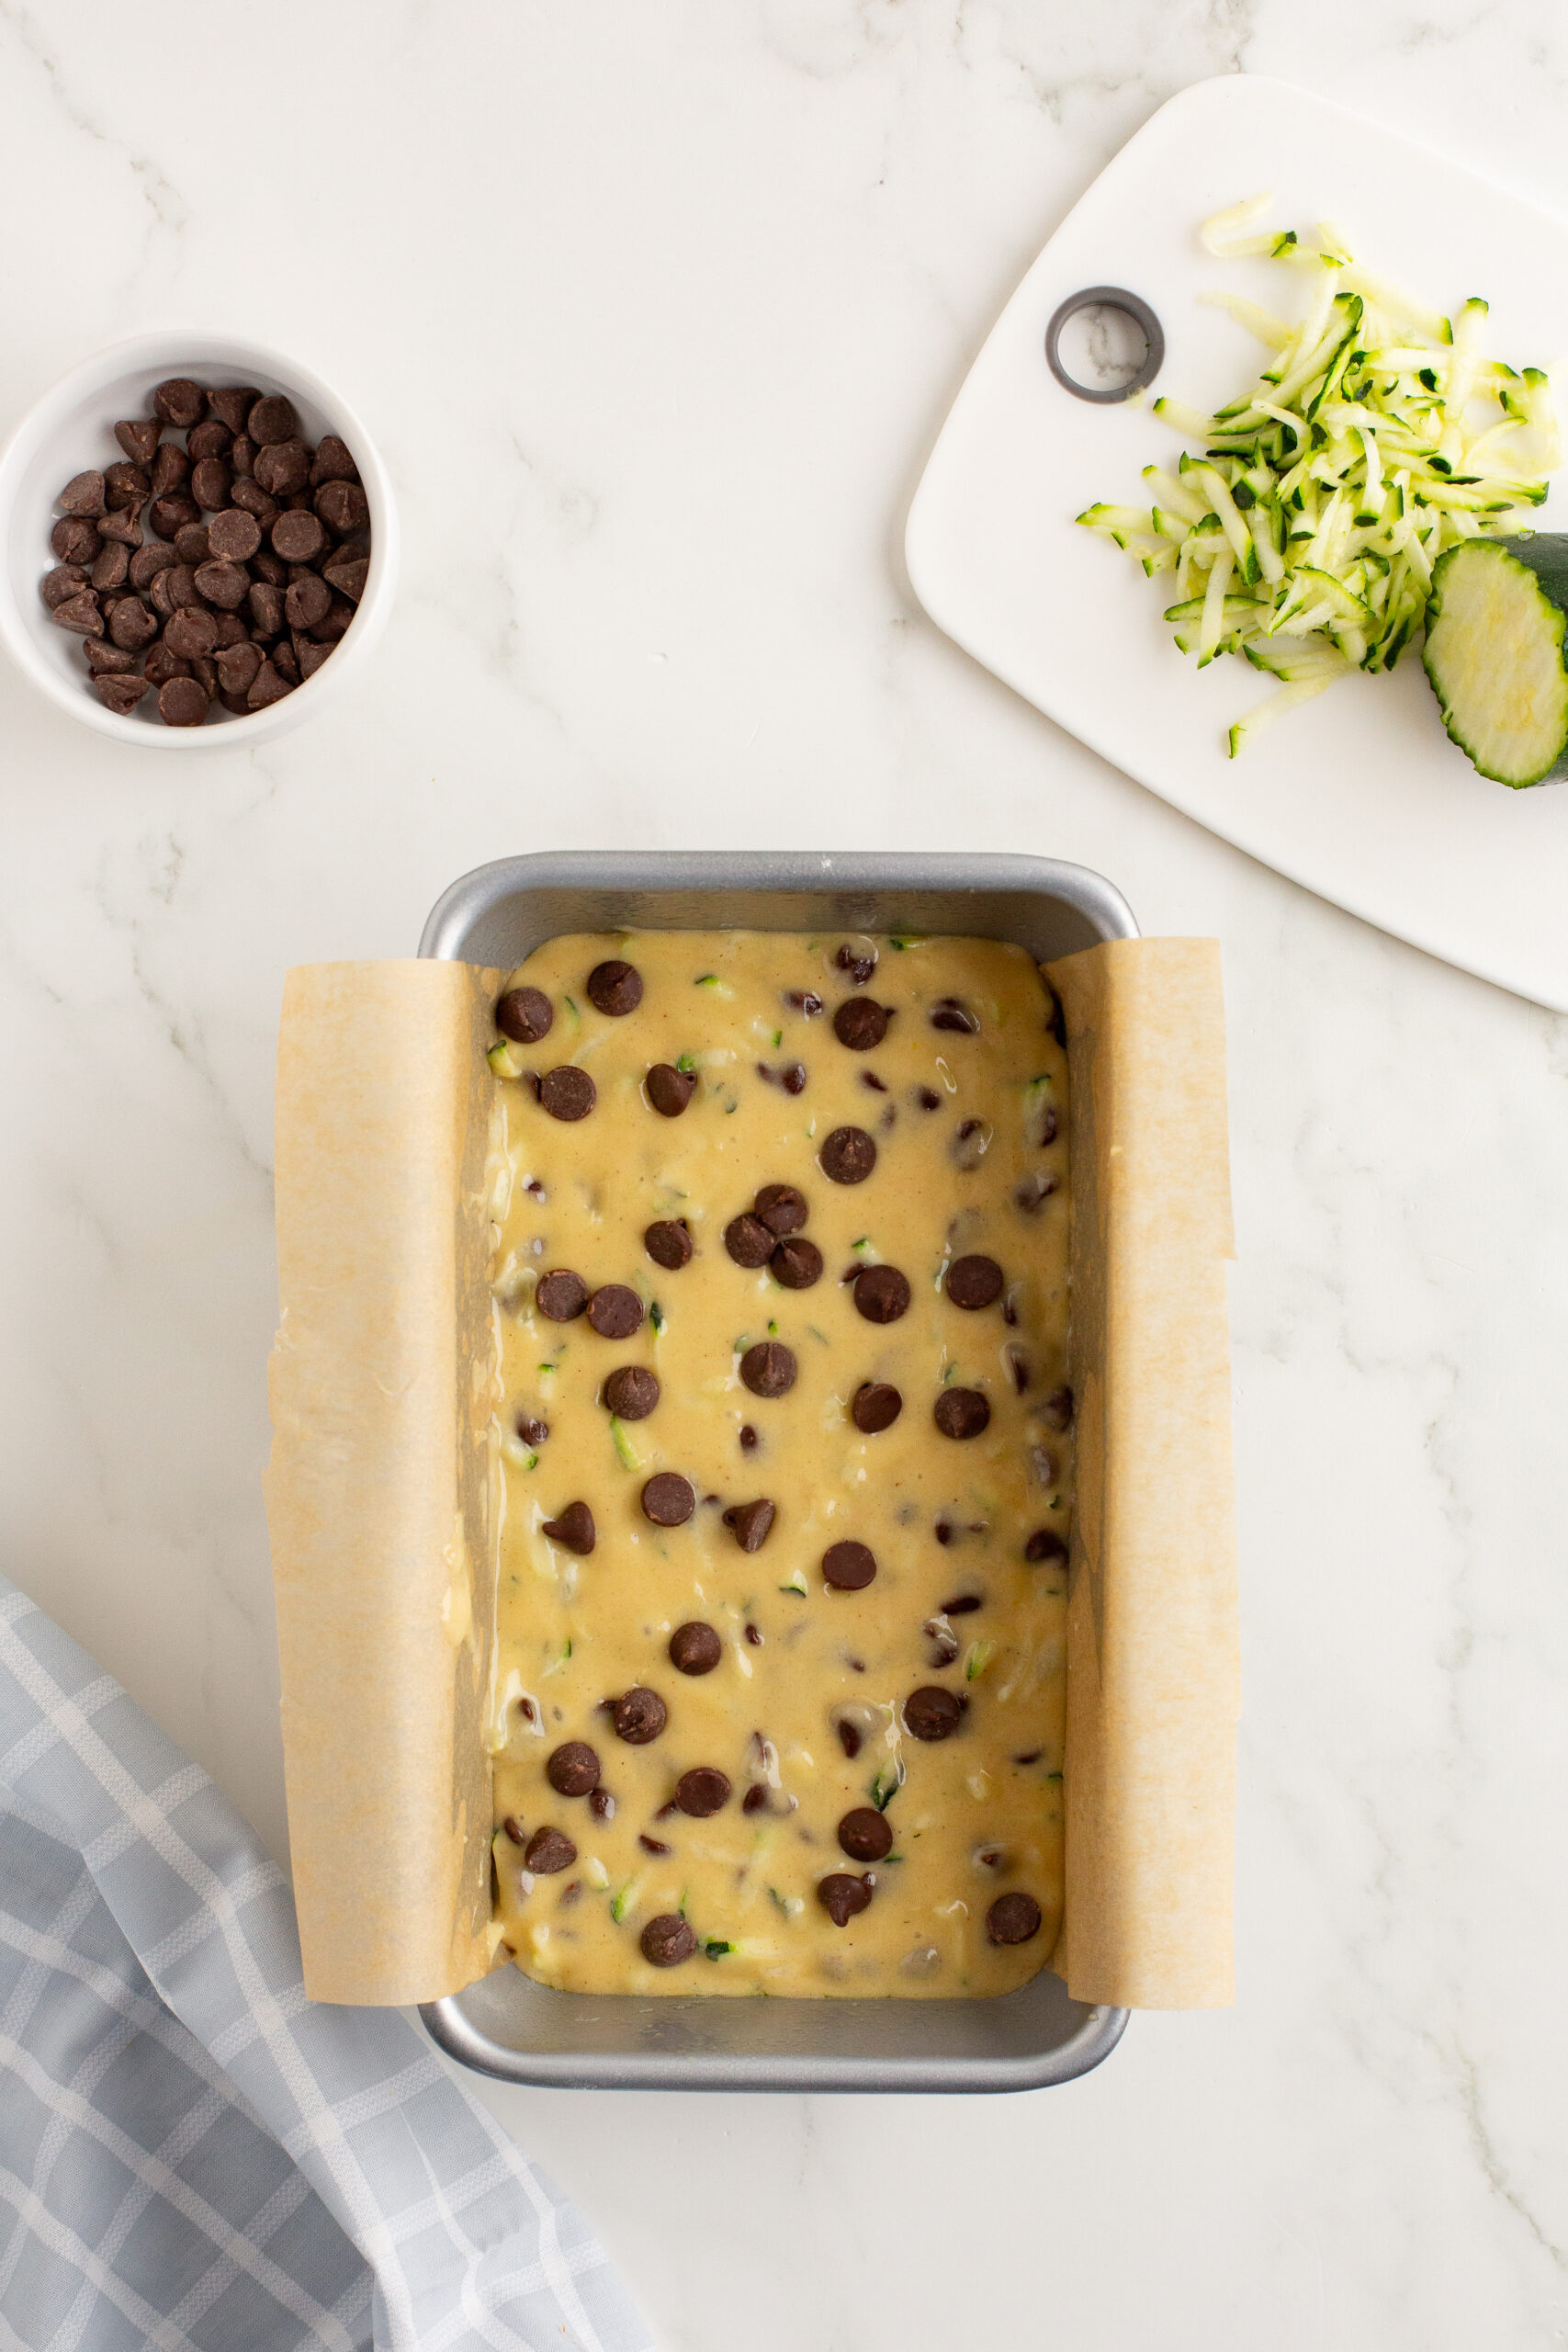 Chocolate chip zucchini batter in a loaf pan.